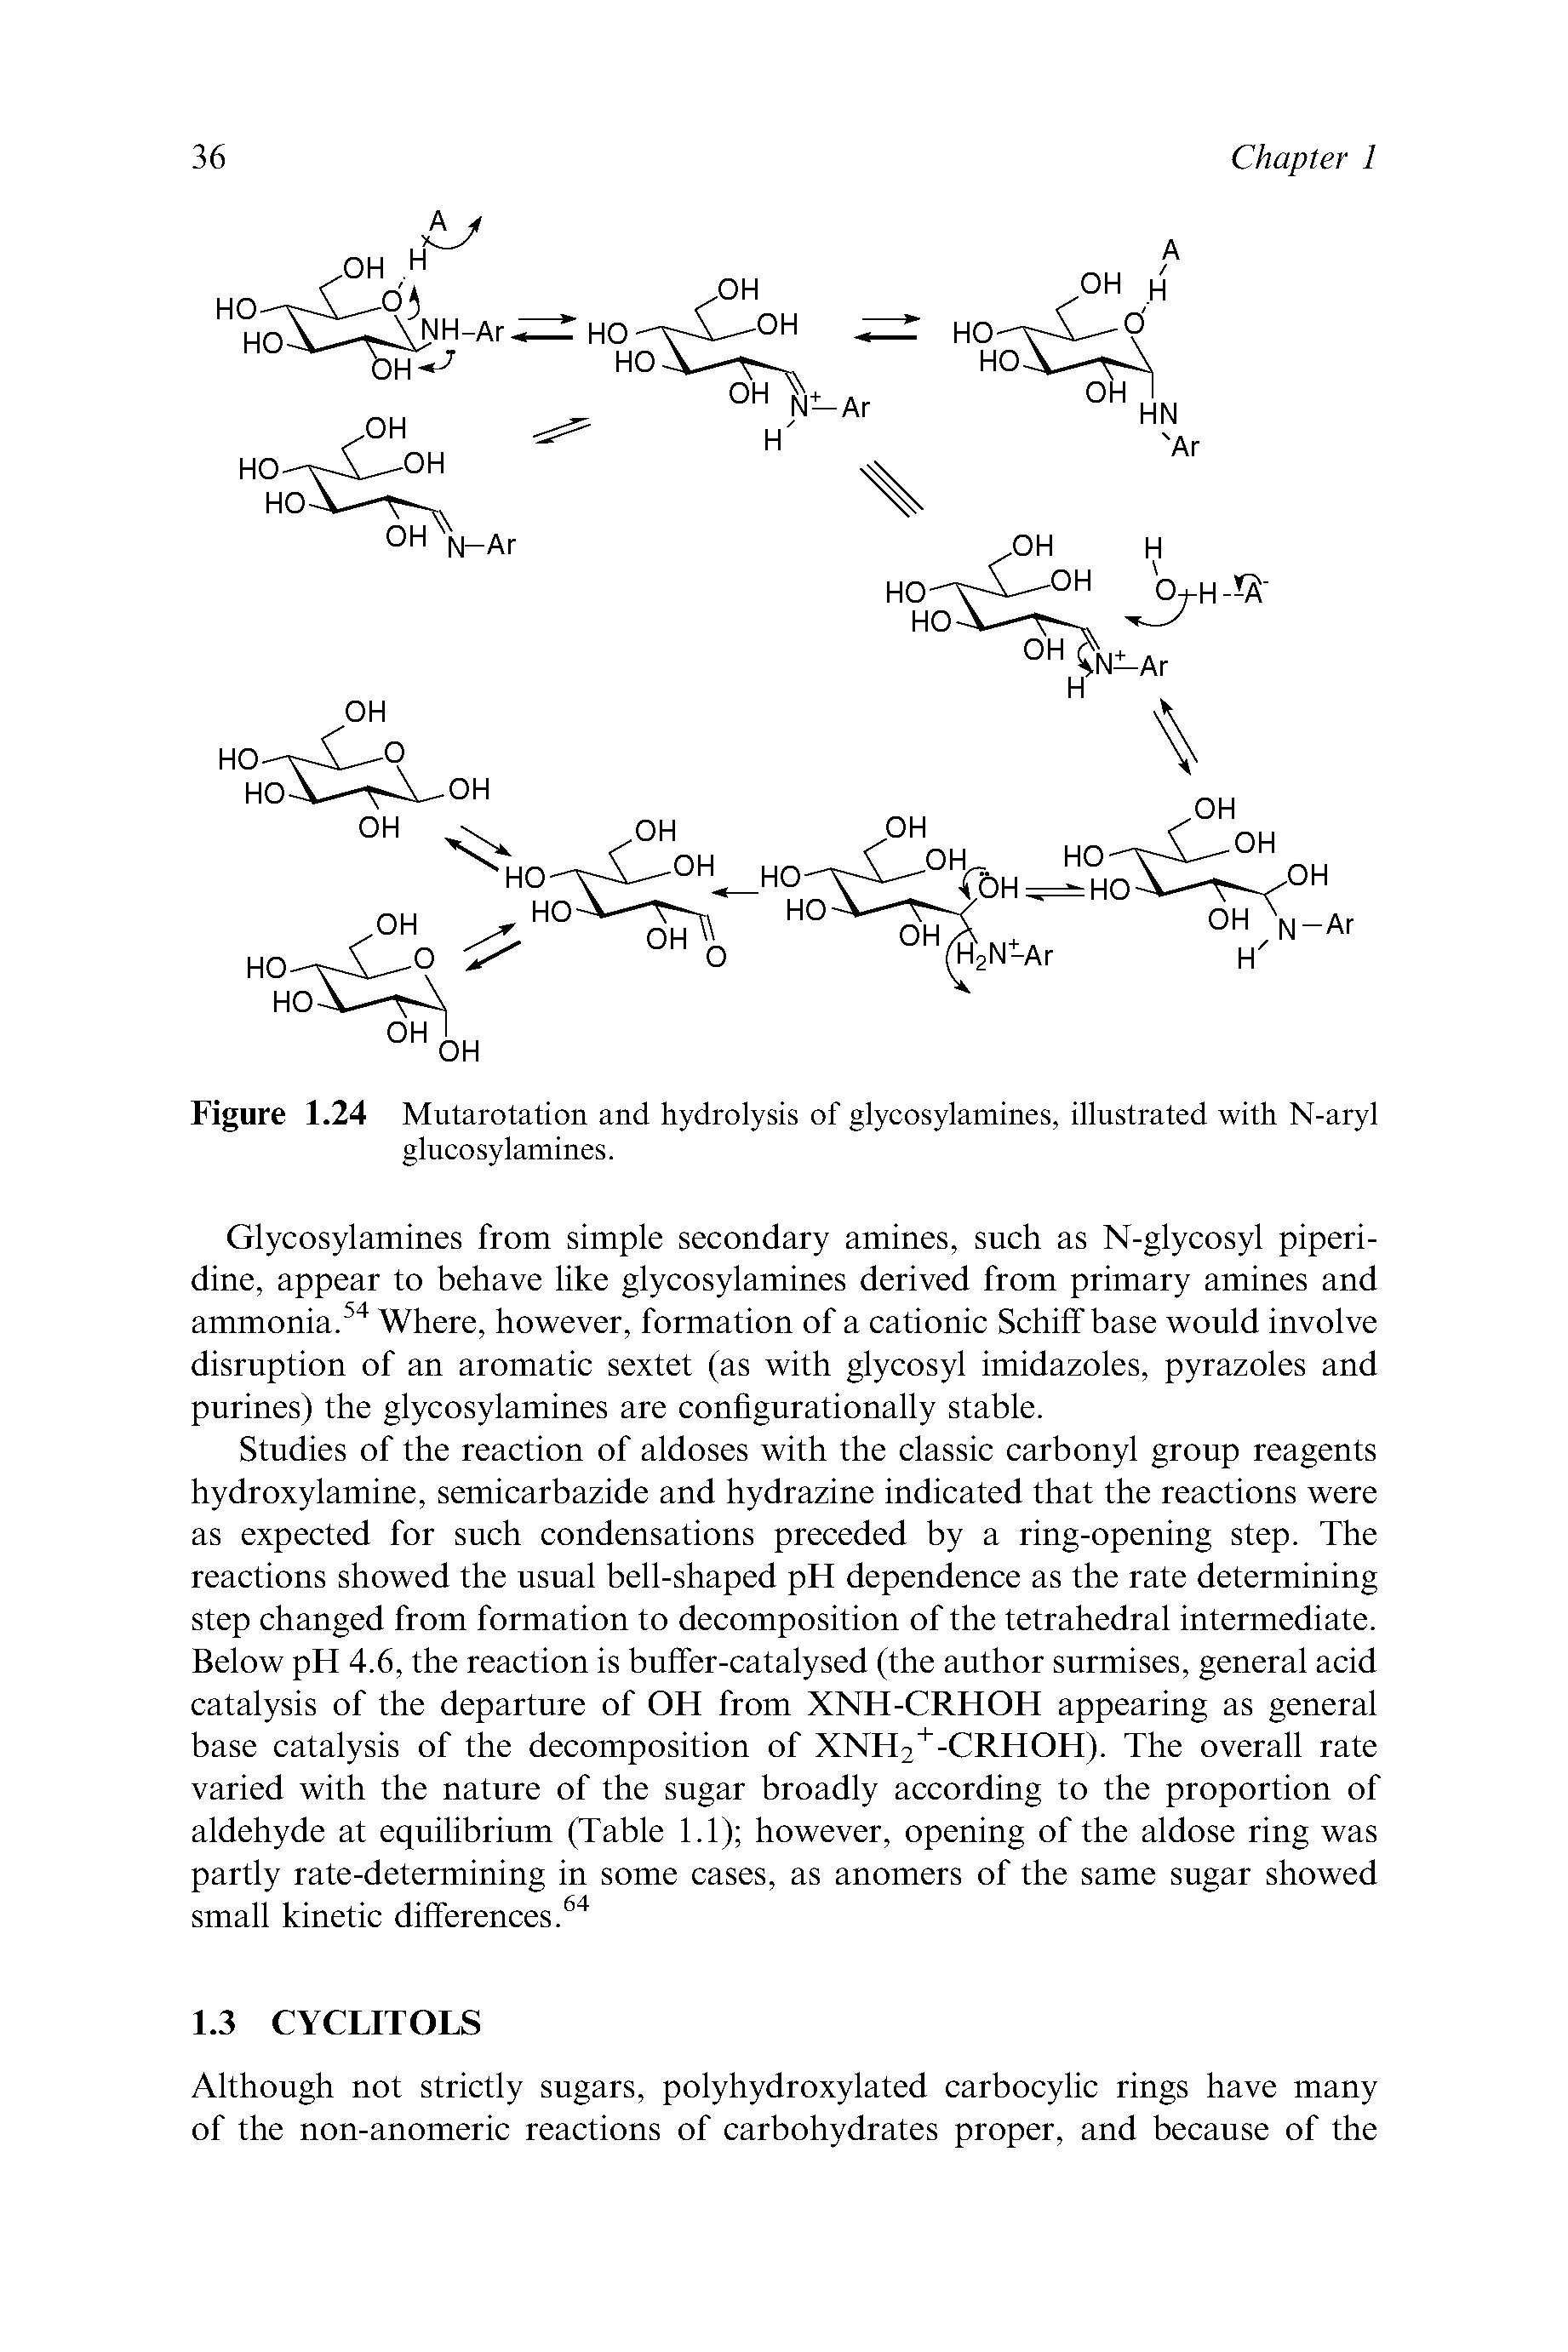 Figure 1.24 Mutarotation and hydrolysis of glycosylamines, illustrated with N-aryl glucosylamines.